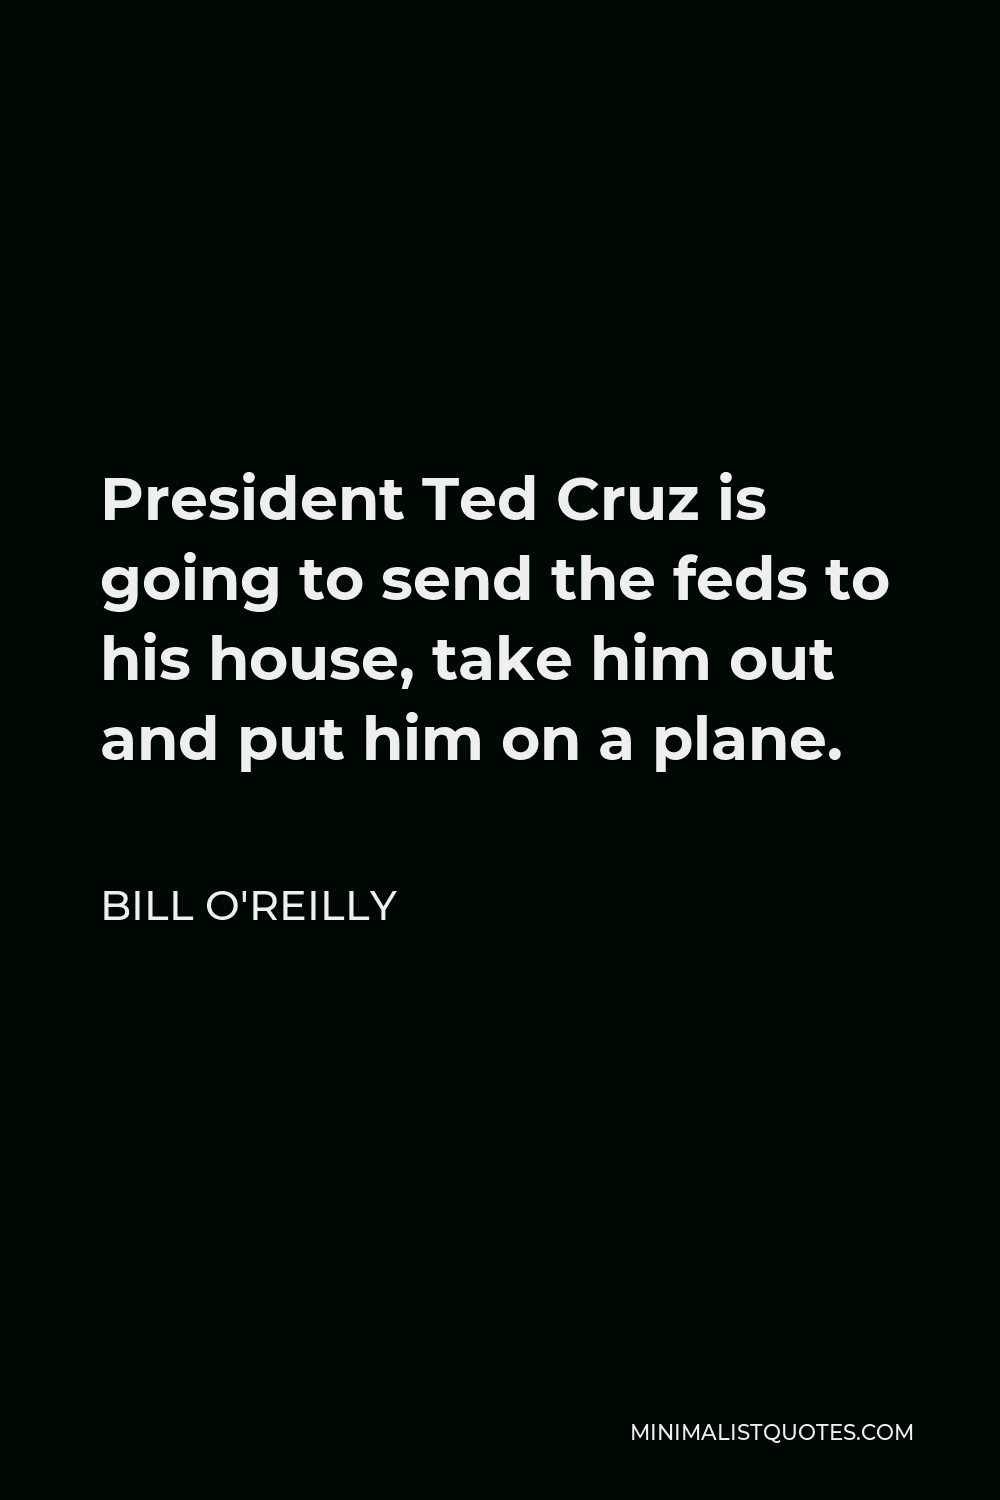 Bill O'Reilly Quote - President Ted Cruz is going to send the feds to his house, take him out and put him on a plane.